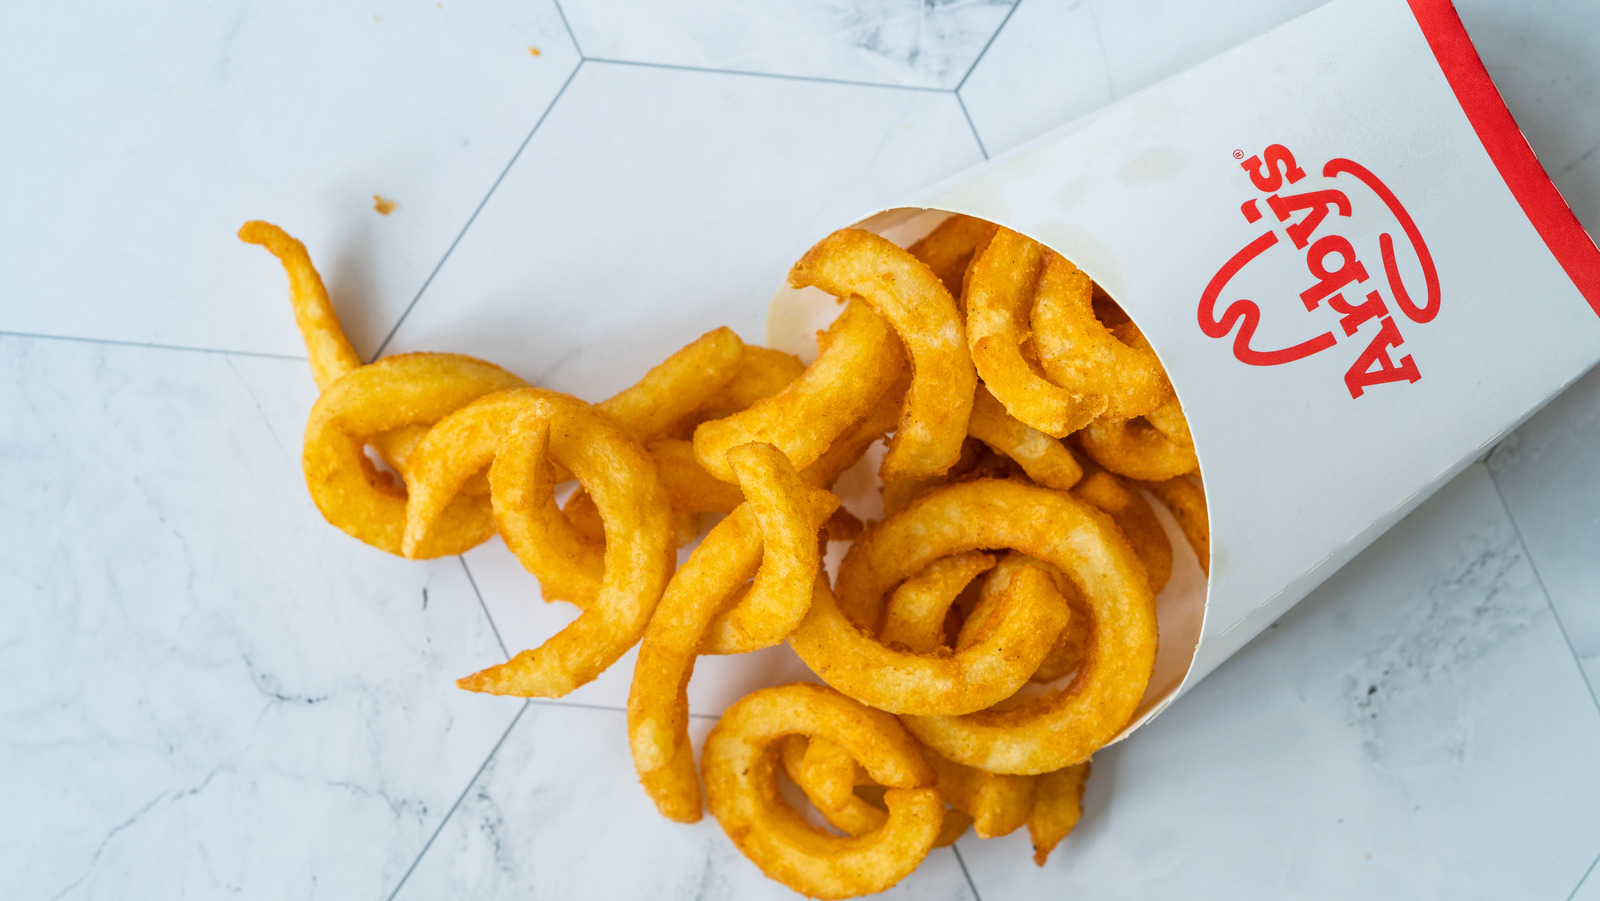 https://www.mashed.com/img/gallery/no-arbys-didnt-invent-the-iconic-curly-fry/l-intro-1683651749.jpg